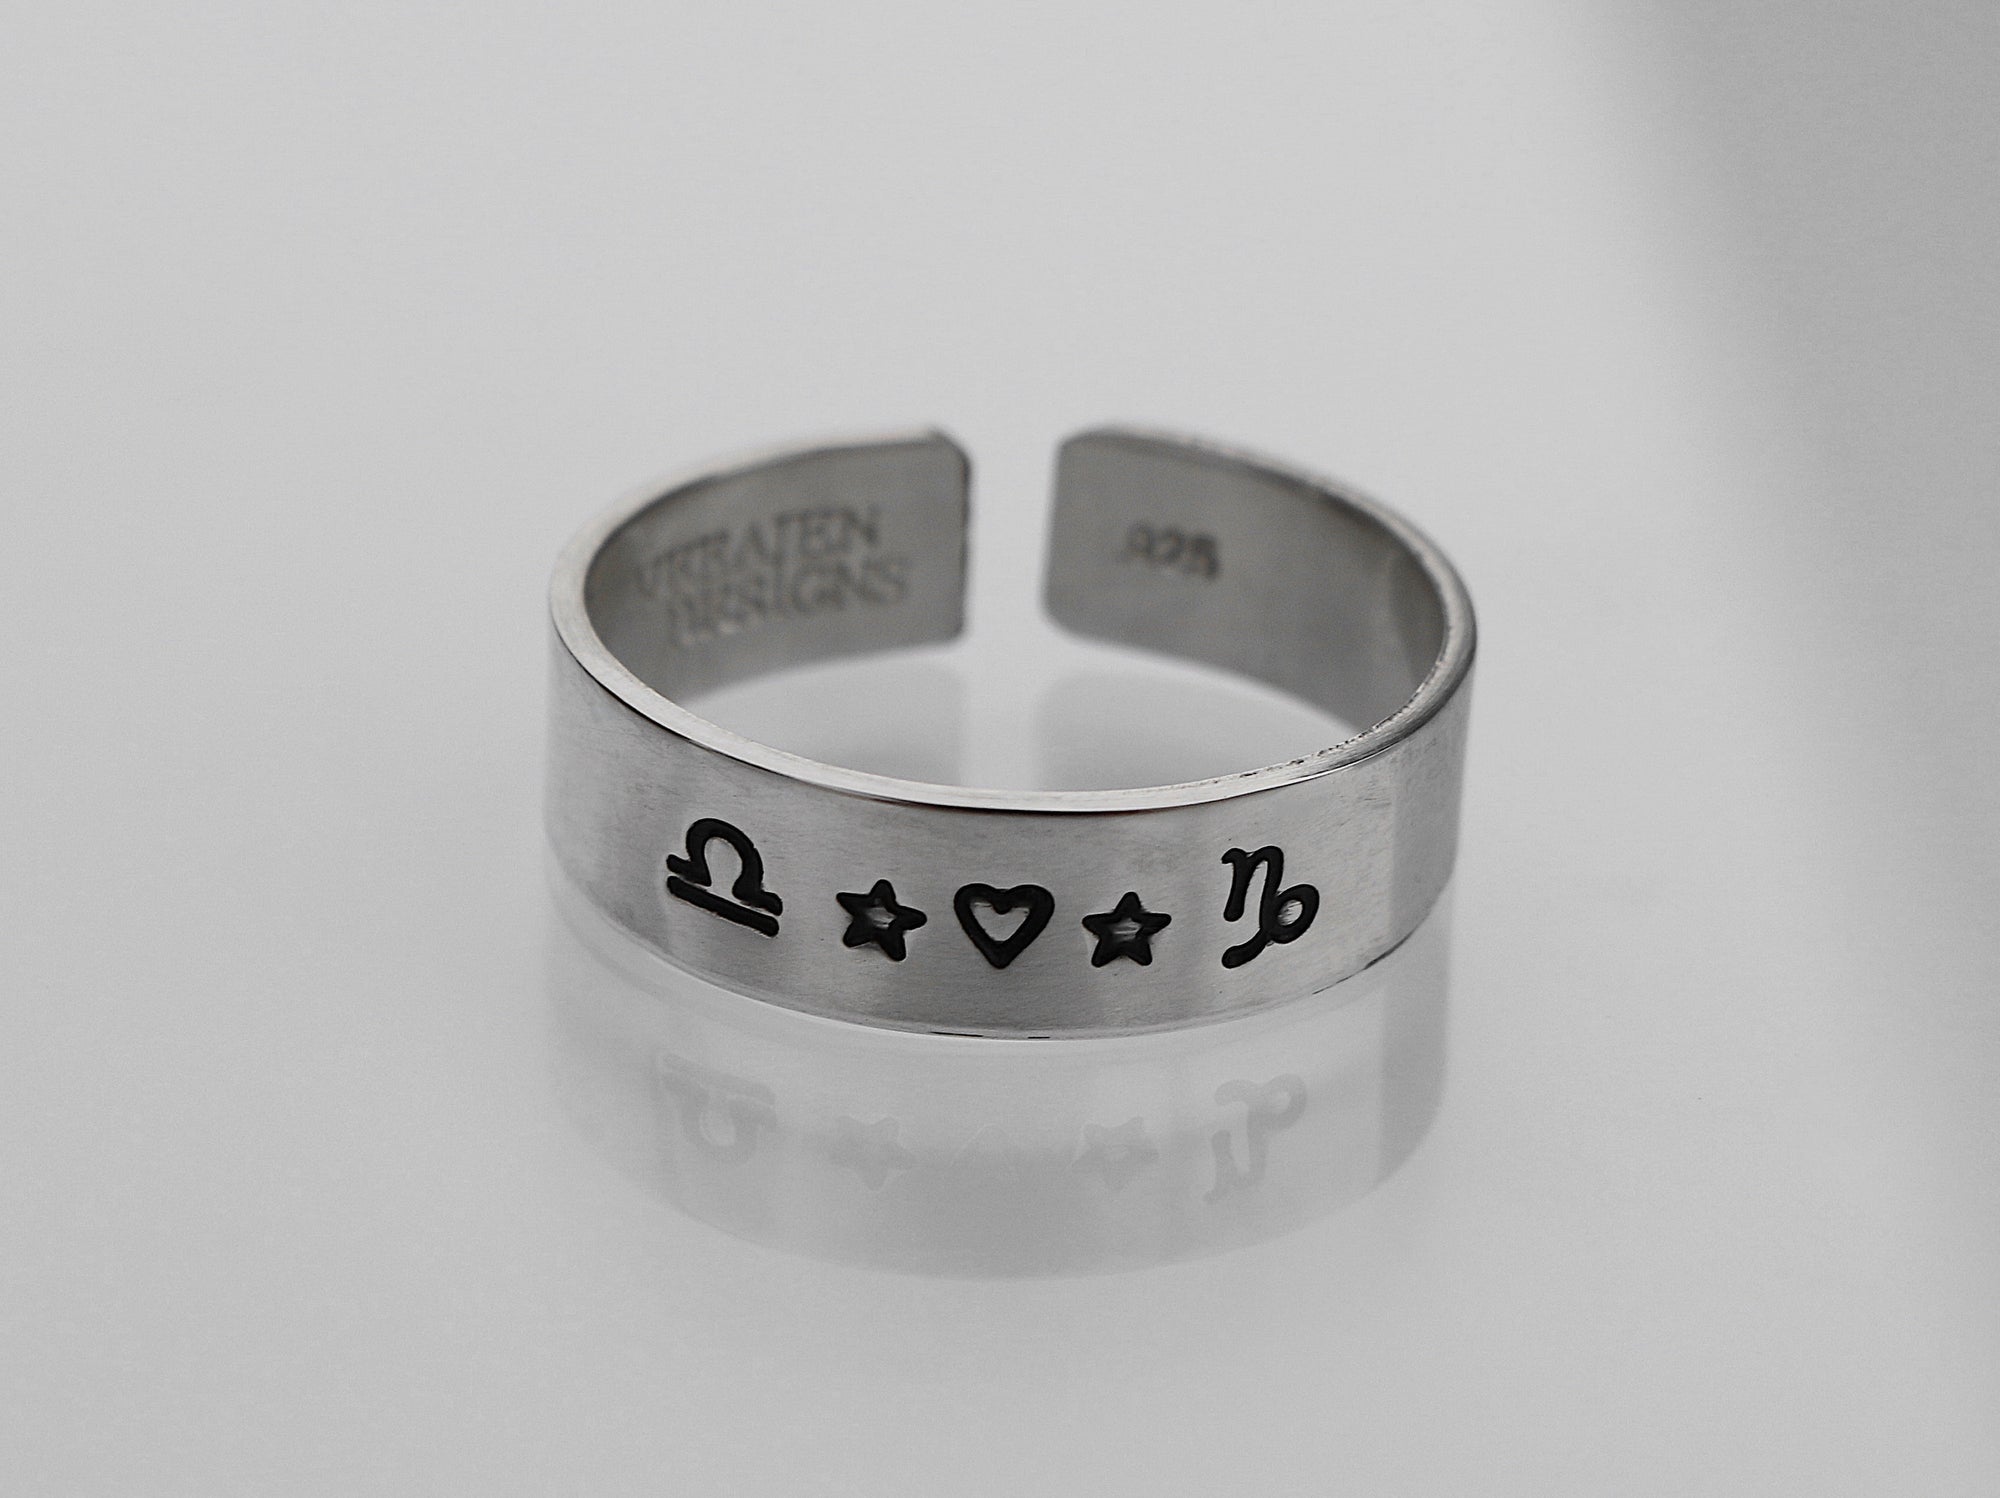 Zodiac Friendship Ring | Custom Astrological Jewelry | Constellation Horoscope Ring | Best Friend Gift | Couples Rings | Anniversary Ring